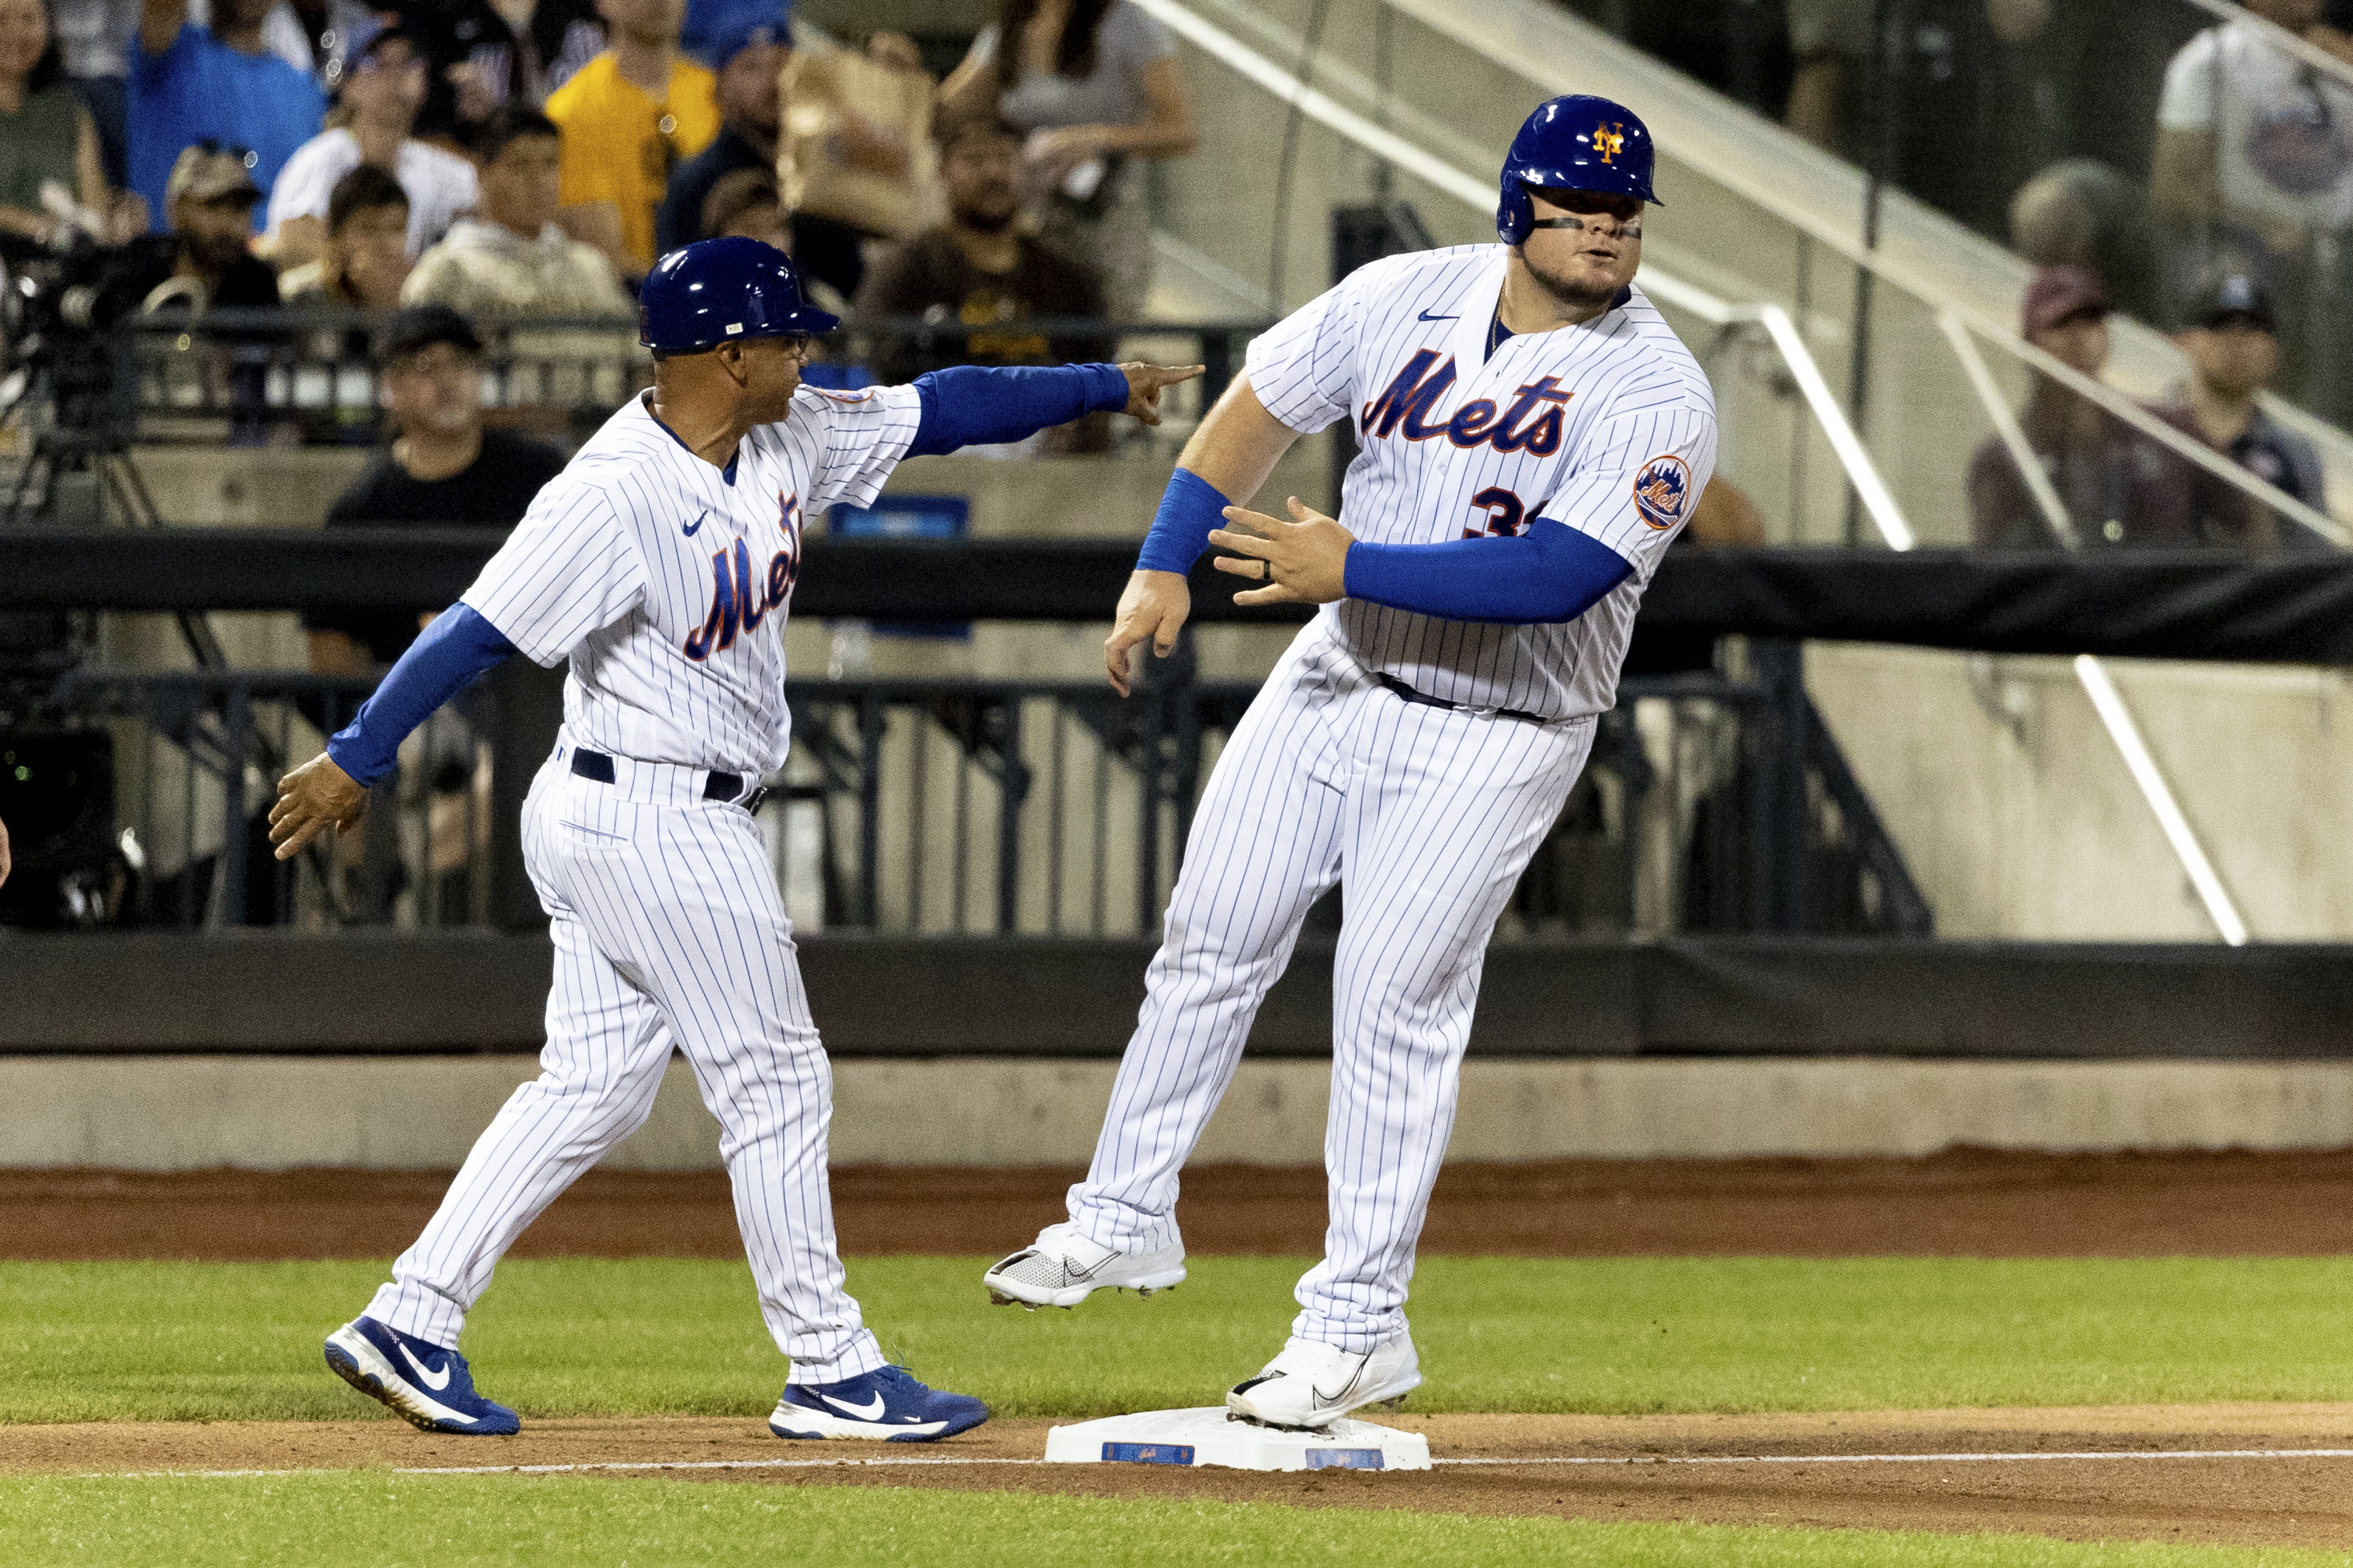 Alonso's 3-run HR, 4 RBIs leads Mets over Padres 8-5 - ABC7 New York